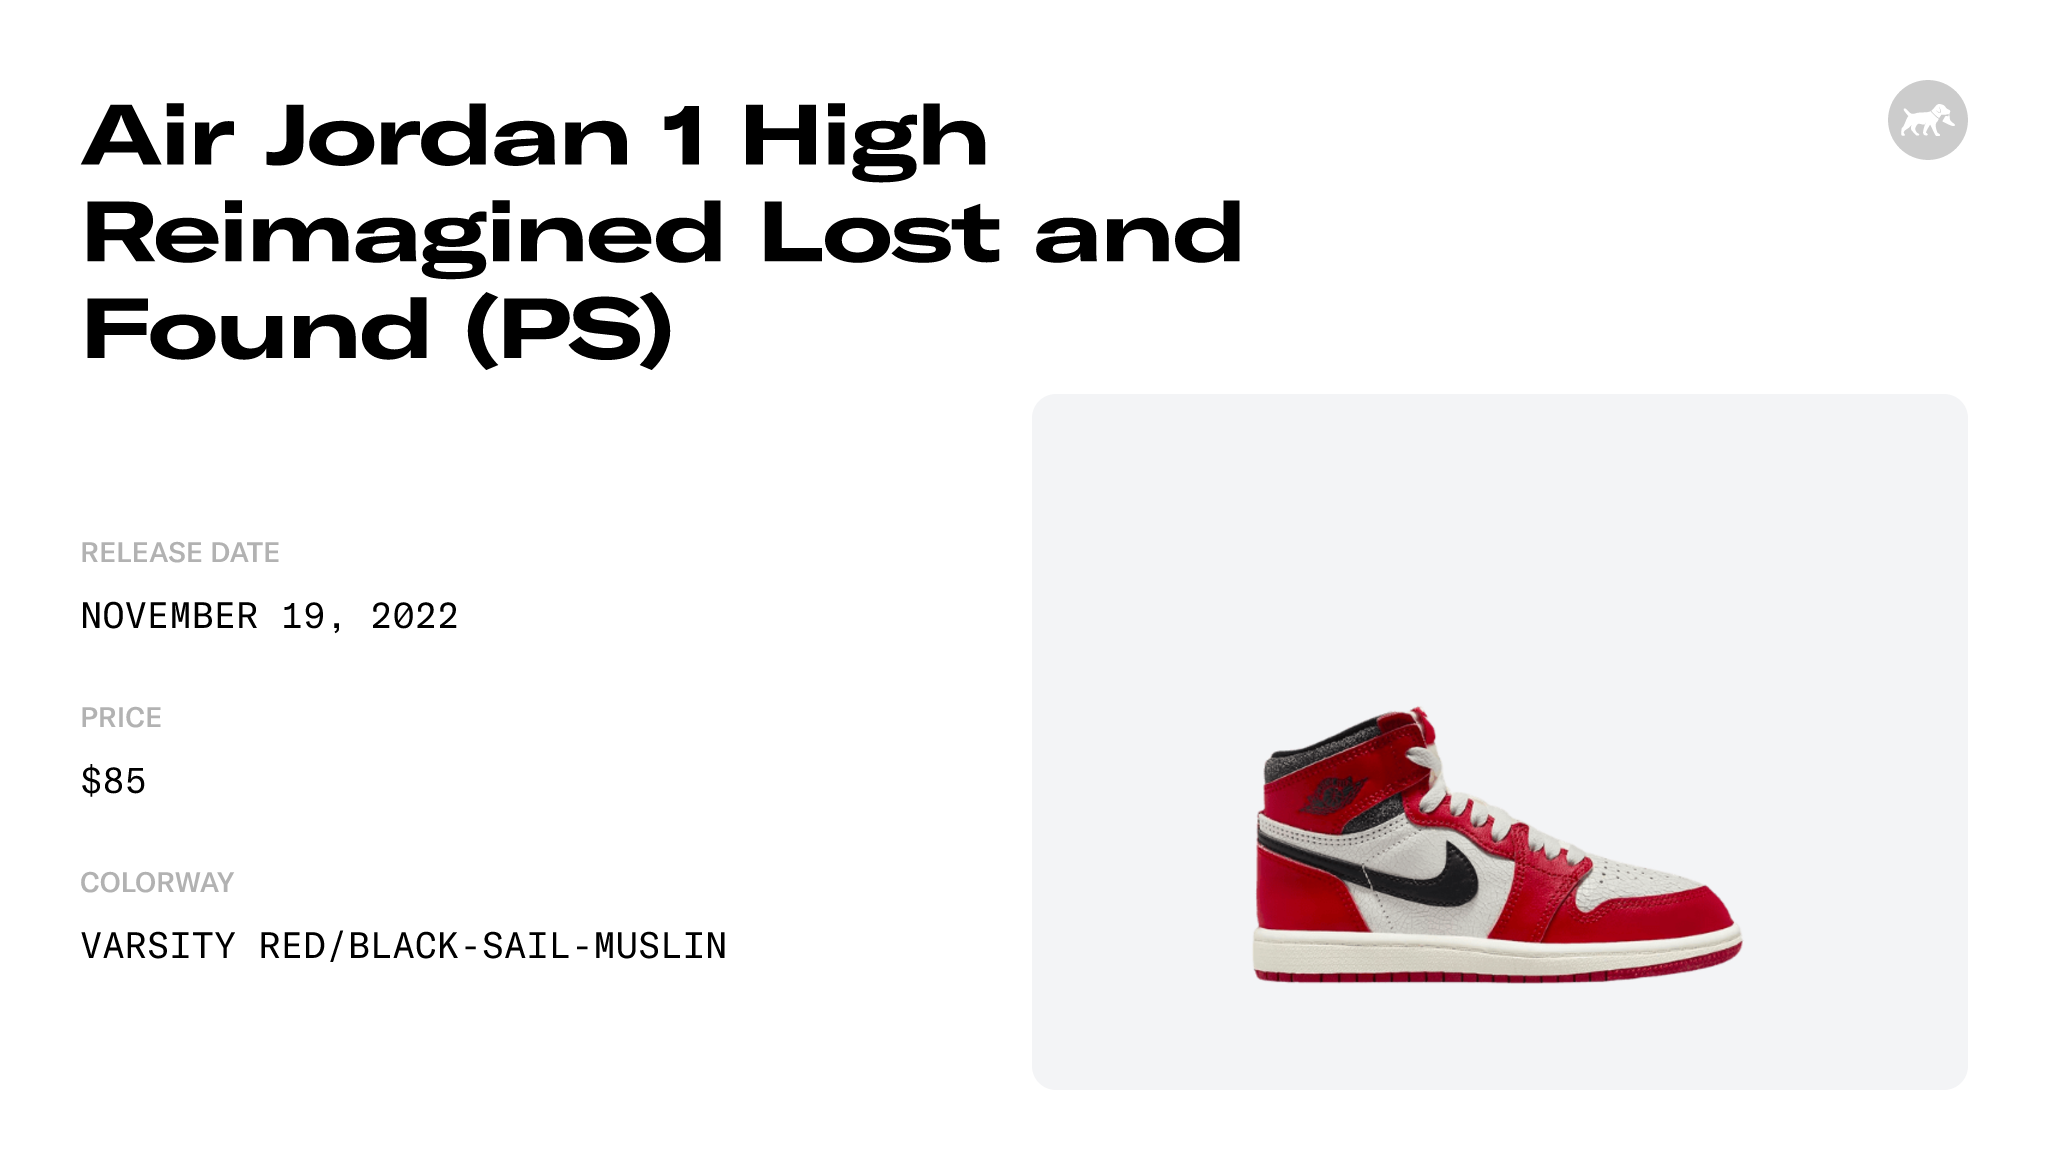 Air Jordan 1 High Reimagined Lost and Found (PS) - FD1412-612 